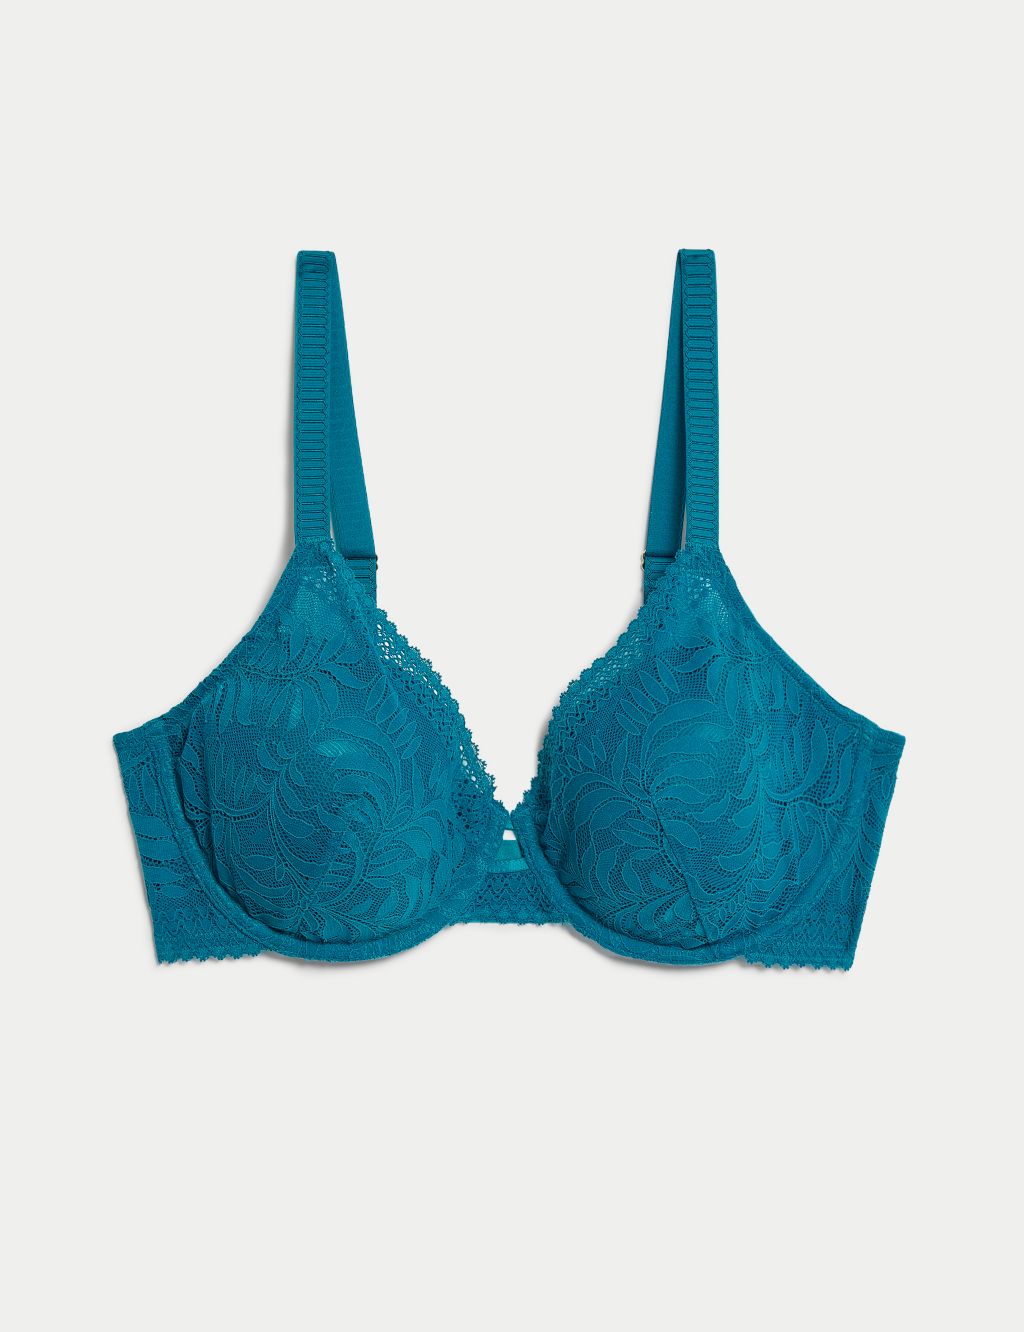 Flexifit™ Lace Wired Full Cup Bra A-E 1 of 7